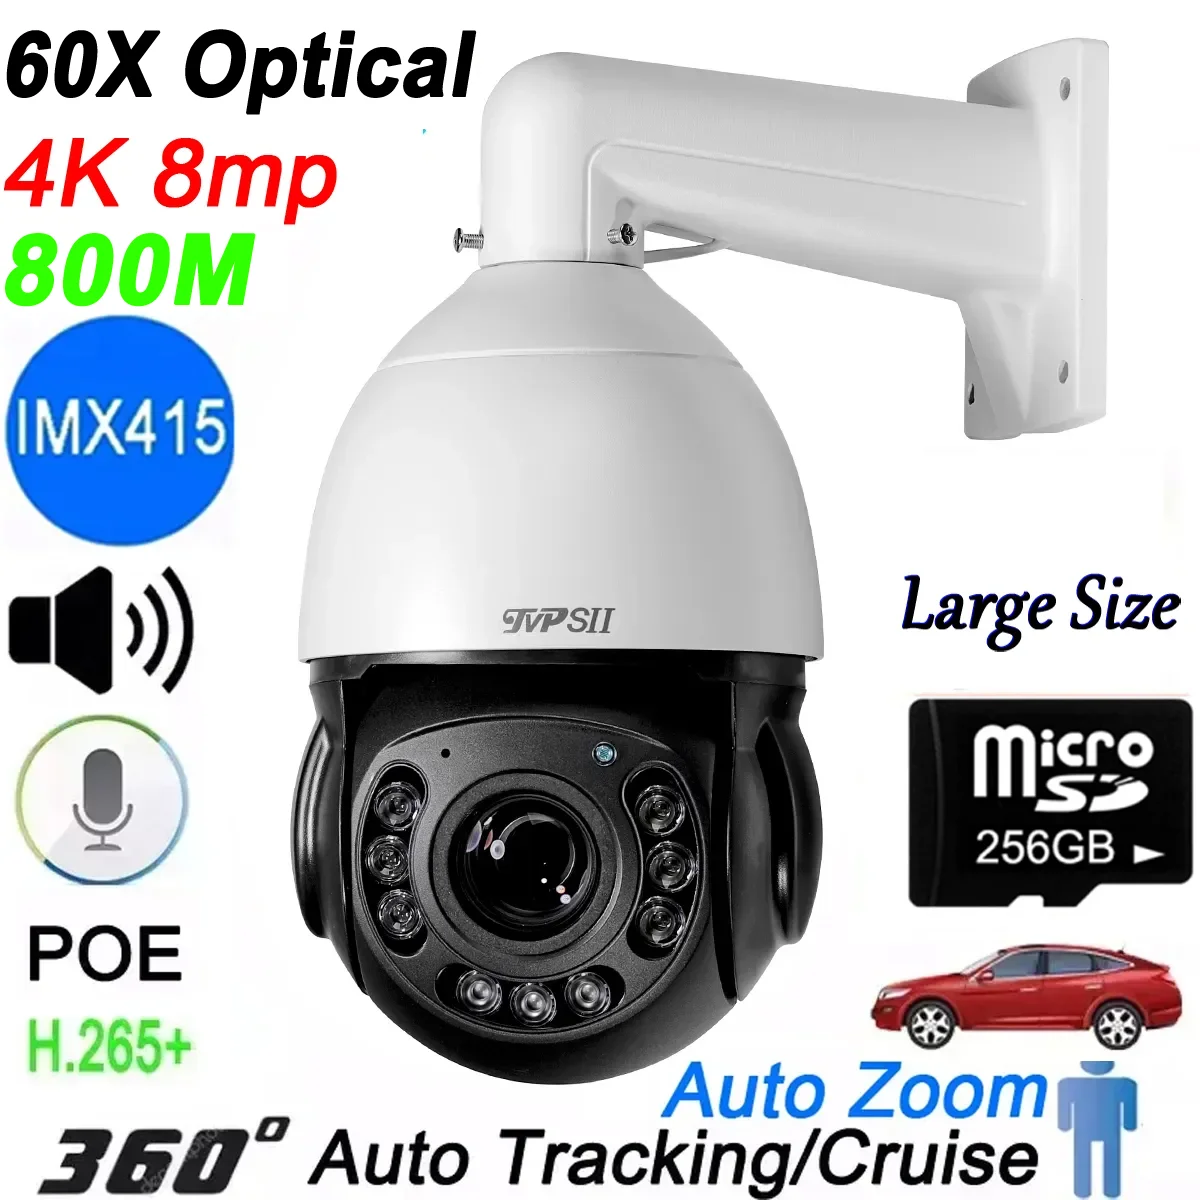 Auto Tracking Car Detection 8MP 4K 60X Optical Zoom 360° Rotation Audio Outdoor ONVIF POE PTZ IP Speed Dome Surveillance Camera max 256g auto tracking 8mp 4k imx415 90x optical zoom 360° rotation audio onvif poe ptz ip speed dome surveillance camera